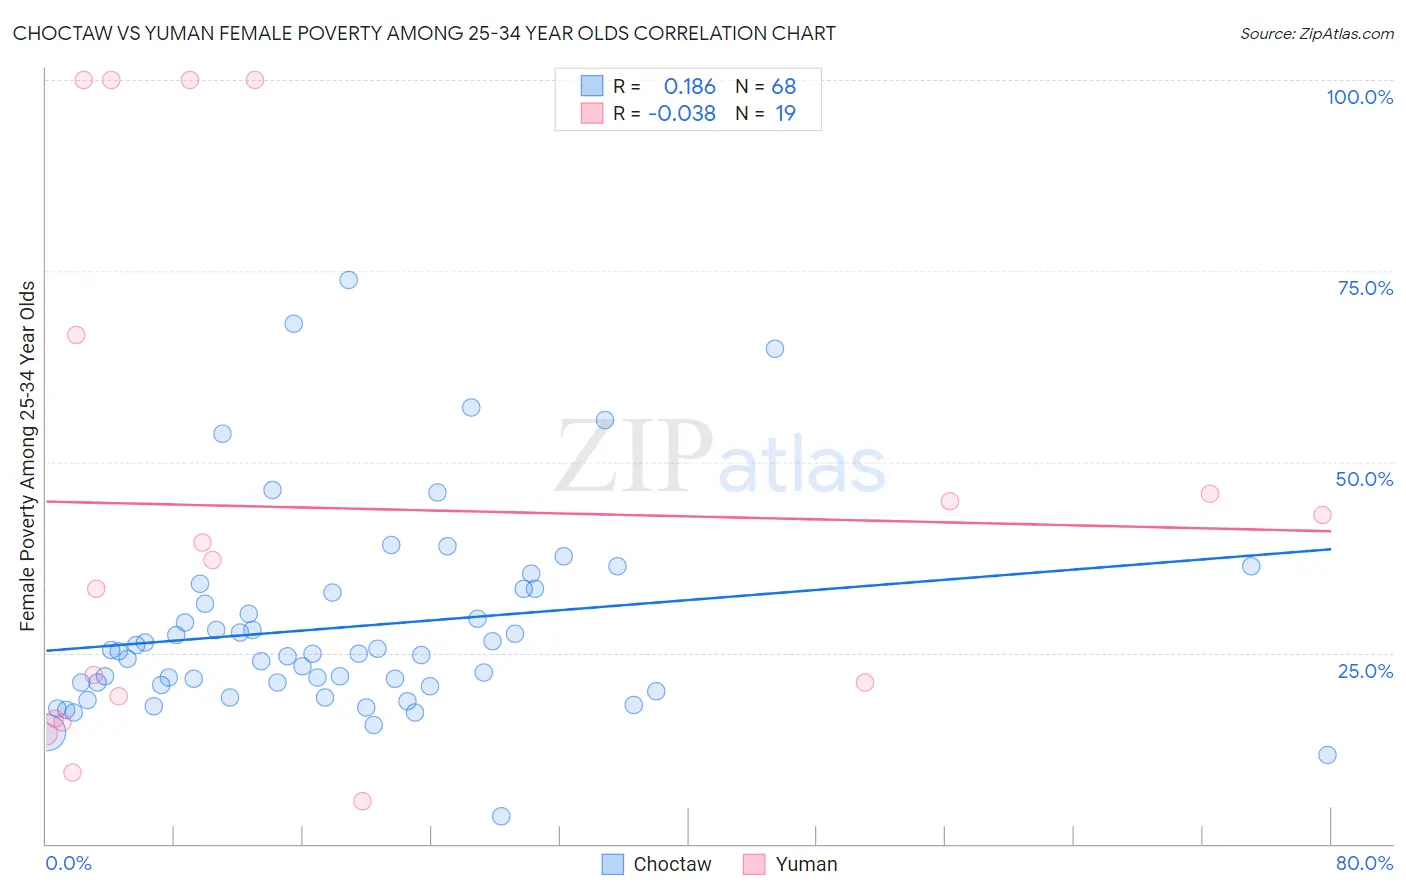 Choctaw vs Yuman Female Poverty Among 25-34 Year Olds